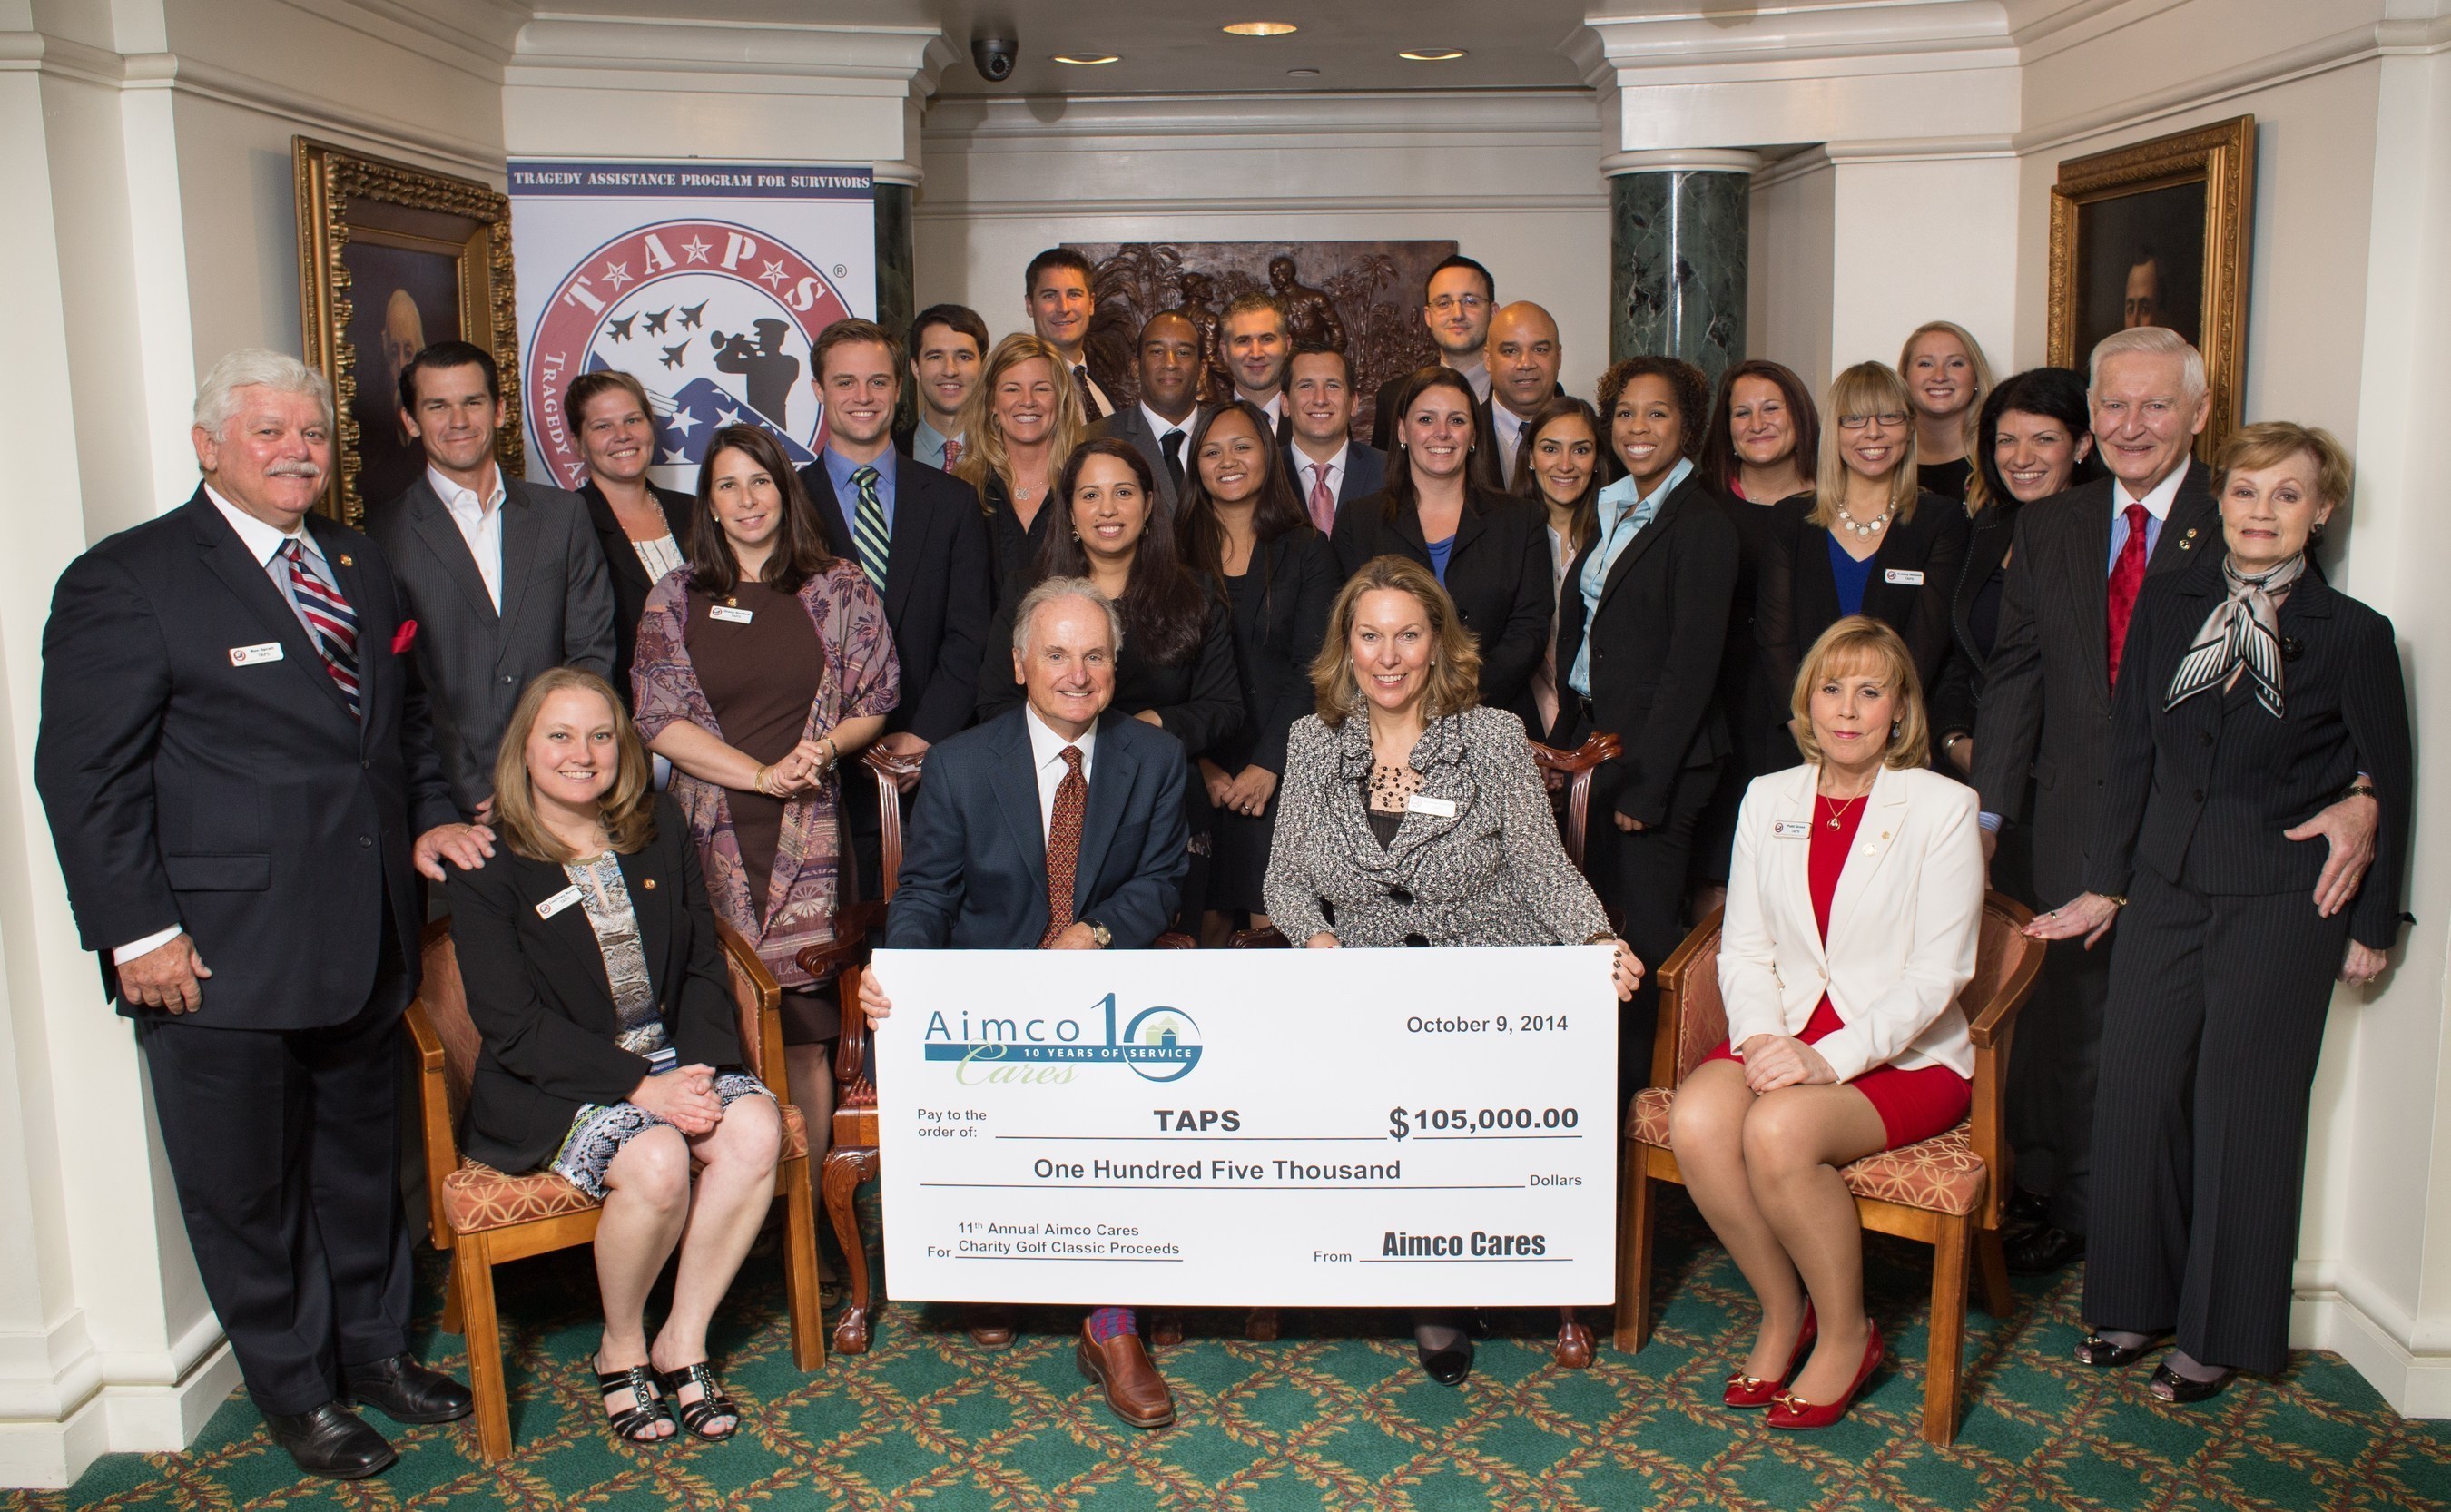 Aimco Chief Administrative Officer Miles Cortez and TAPS Founder and President Bonnie Carroll hold a ceremonial check representing Aimco's $105,000 donation to TAPS. They were joined by TAPS leadership, 15 members of the Aimco DC team, and Brian Bradford of RentPath, a major tournament sponsor.